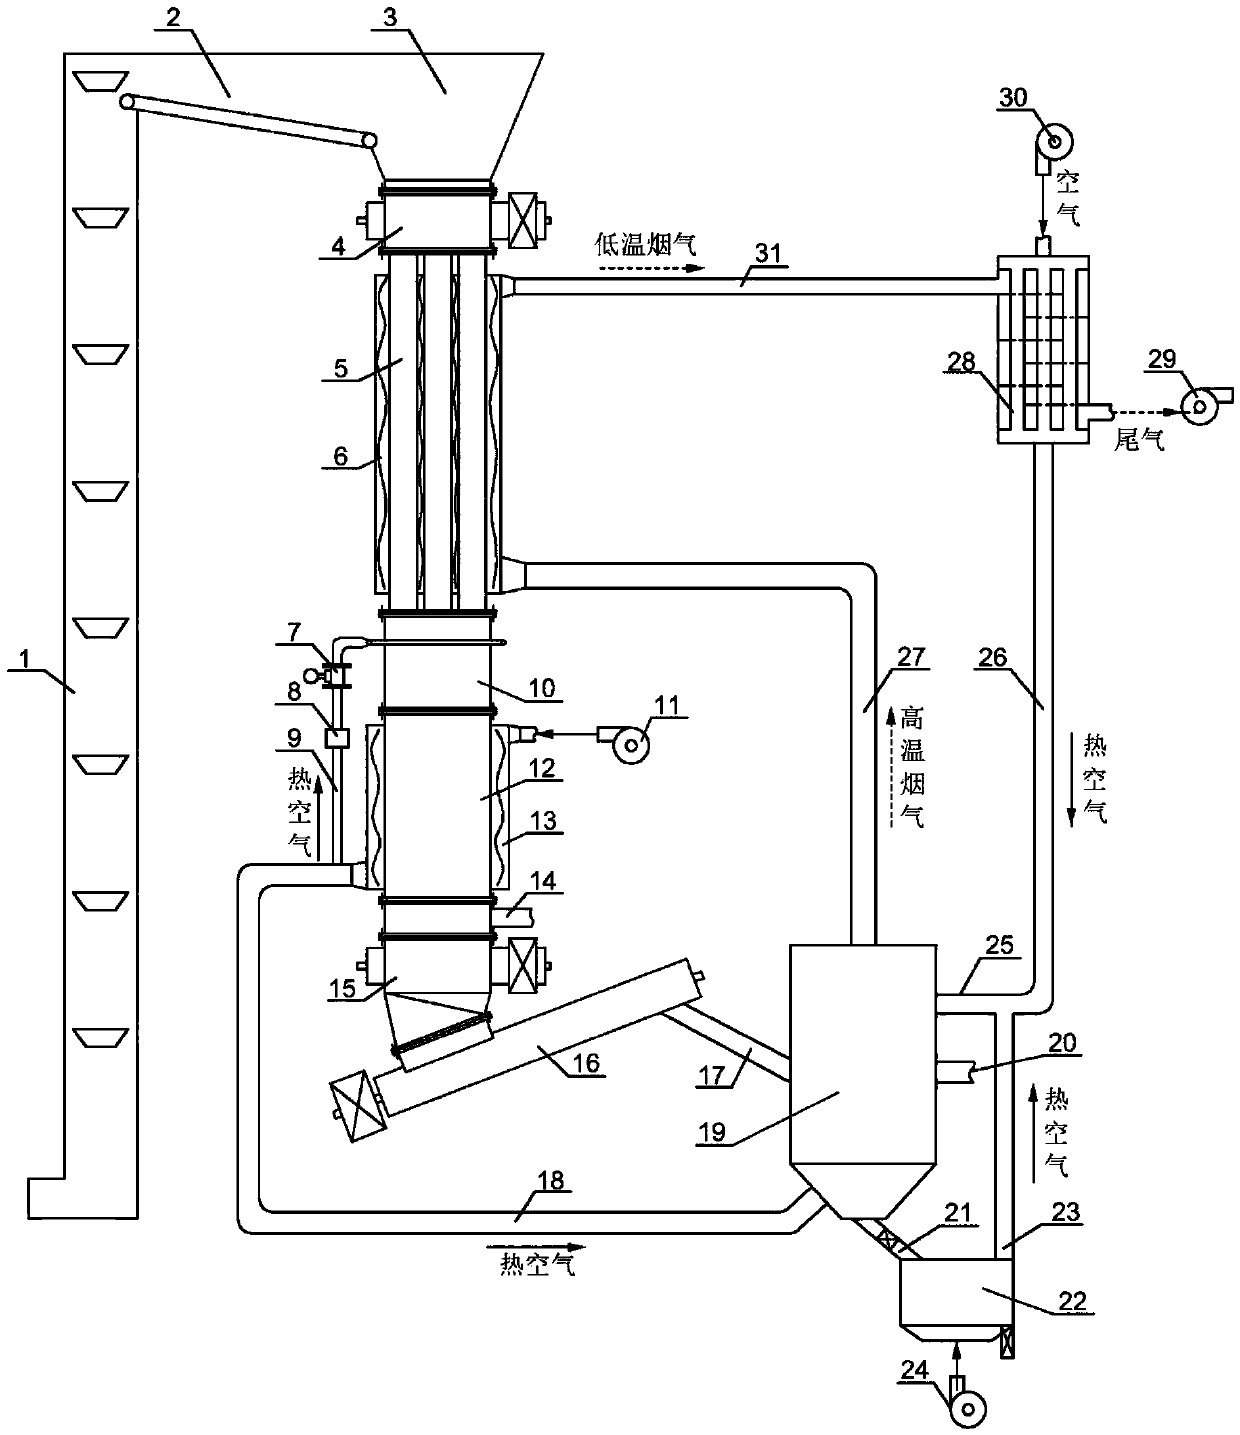 Continuous biomass pyrolysis gasification device and method